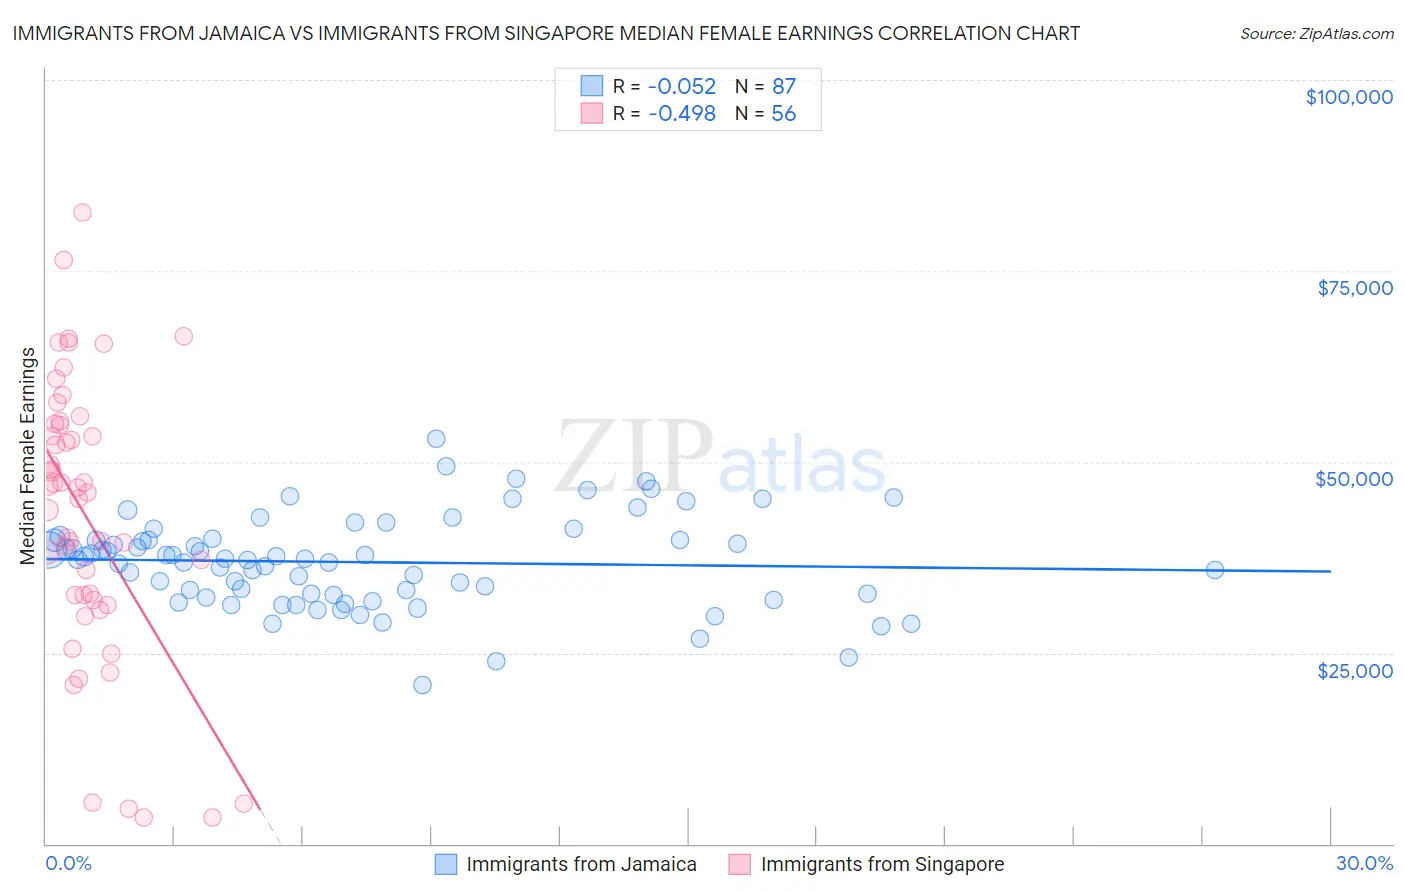 Immigrants from Jamaica vs Immigrants from Singapore Median Female Earnings